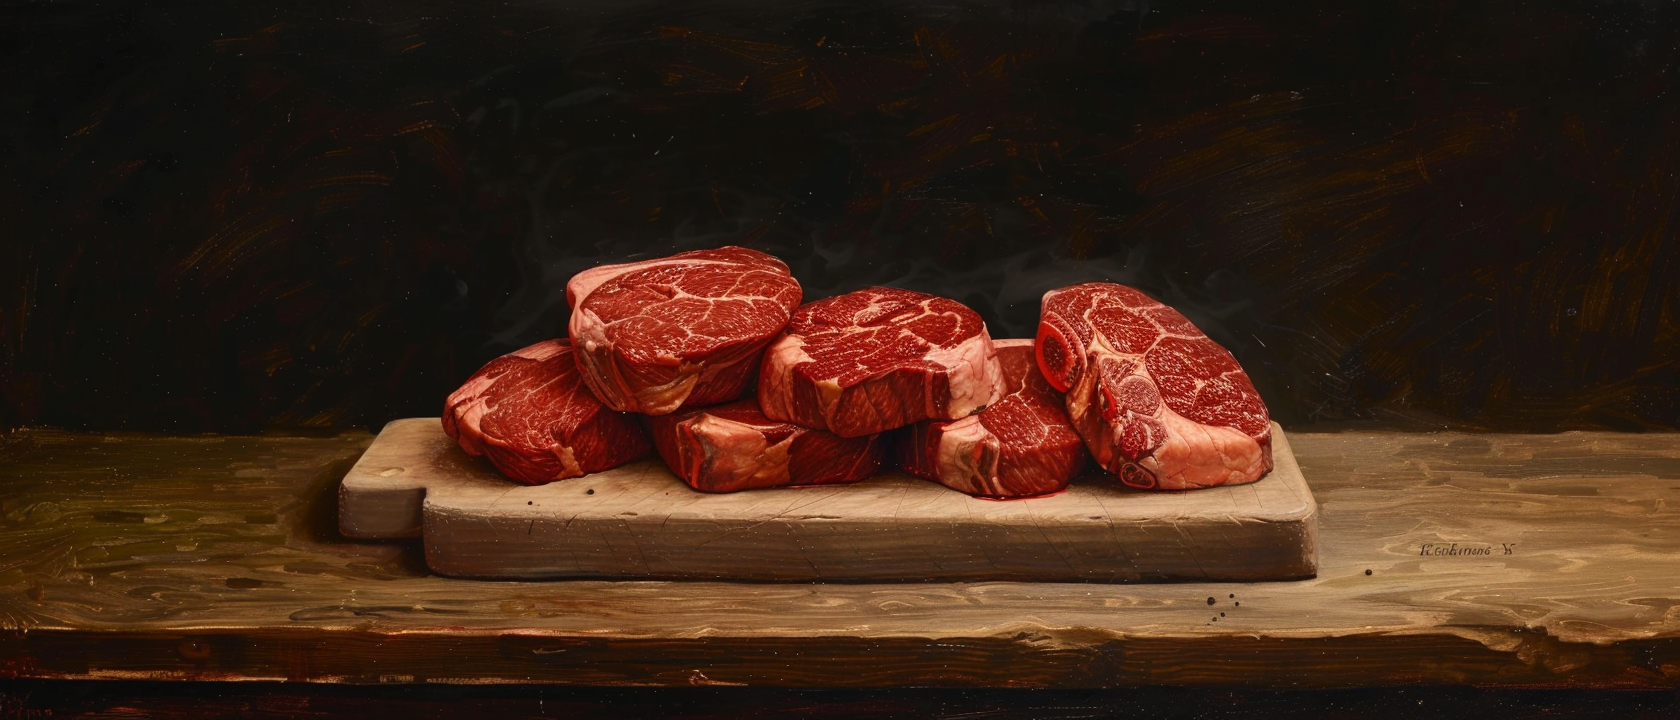 Debunking Myths About Red Meat Consumption